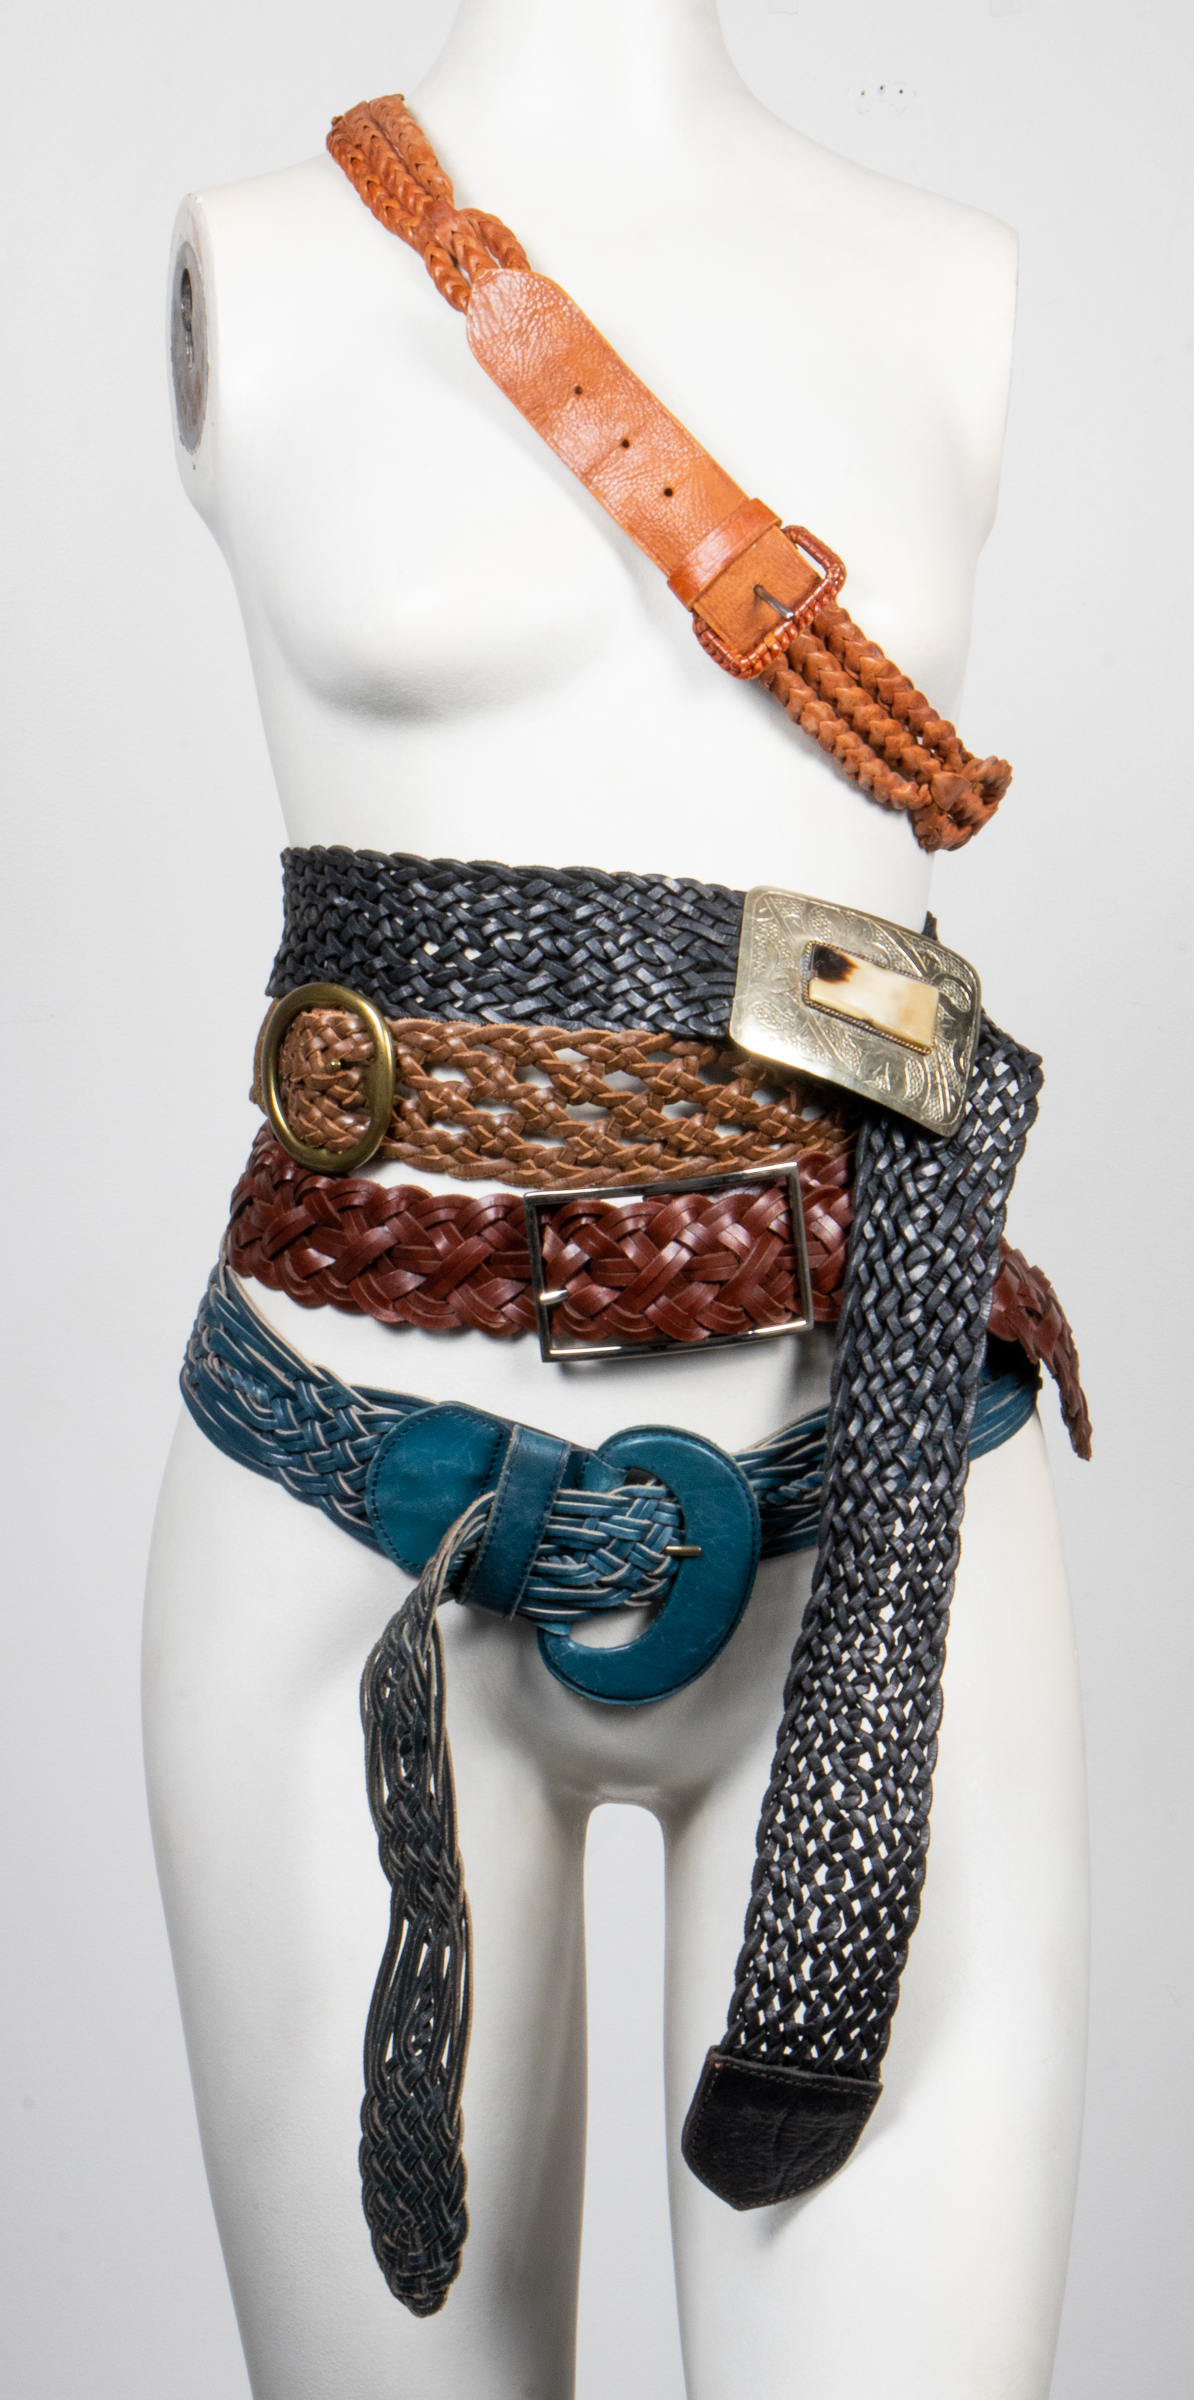 ASSORTED WOVEN LEATHER BELTS GROUP 3c2ec7